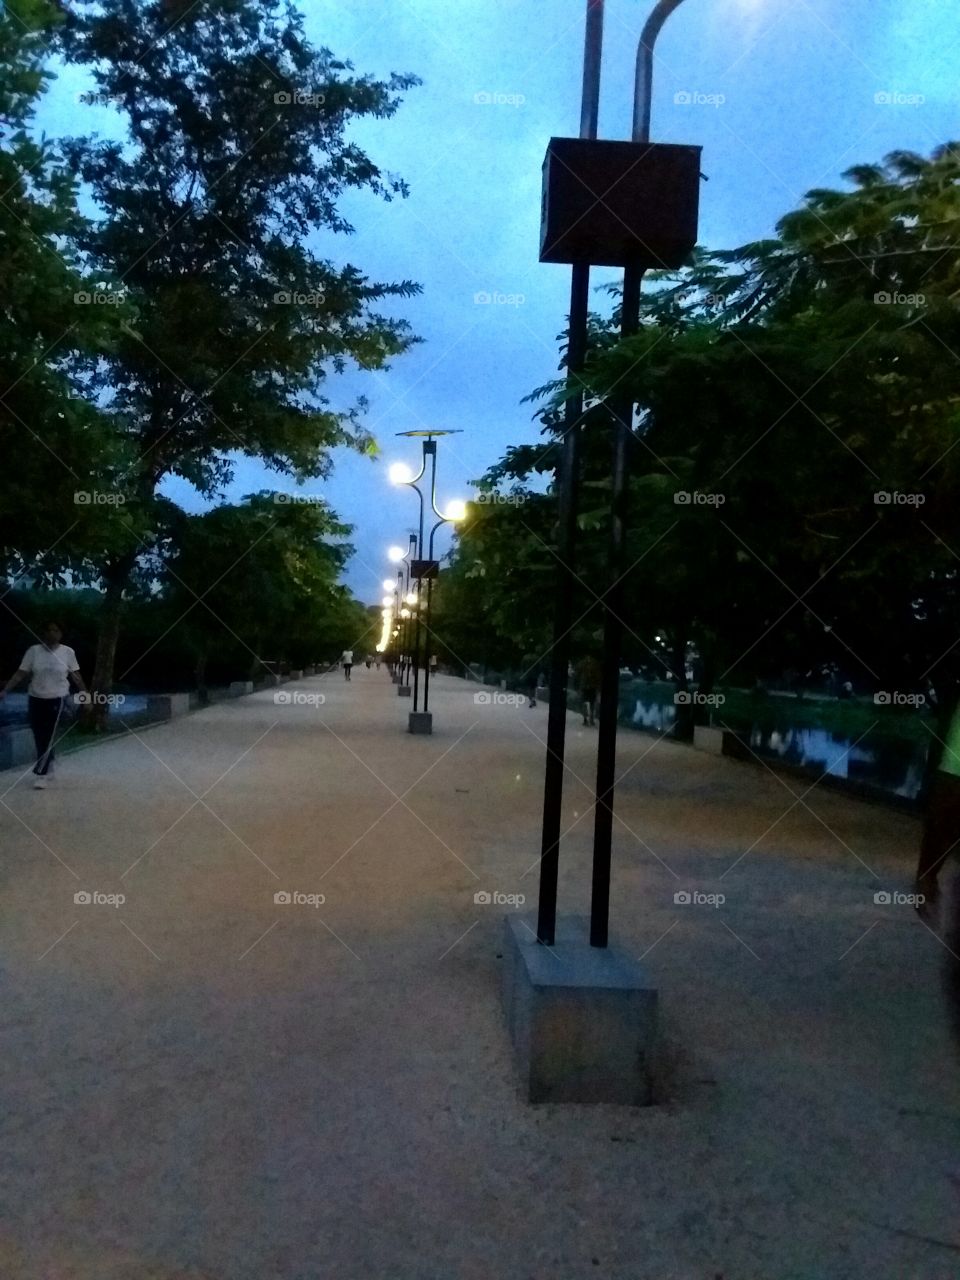 At the jogging path in the evening.